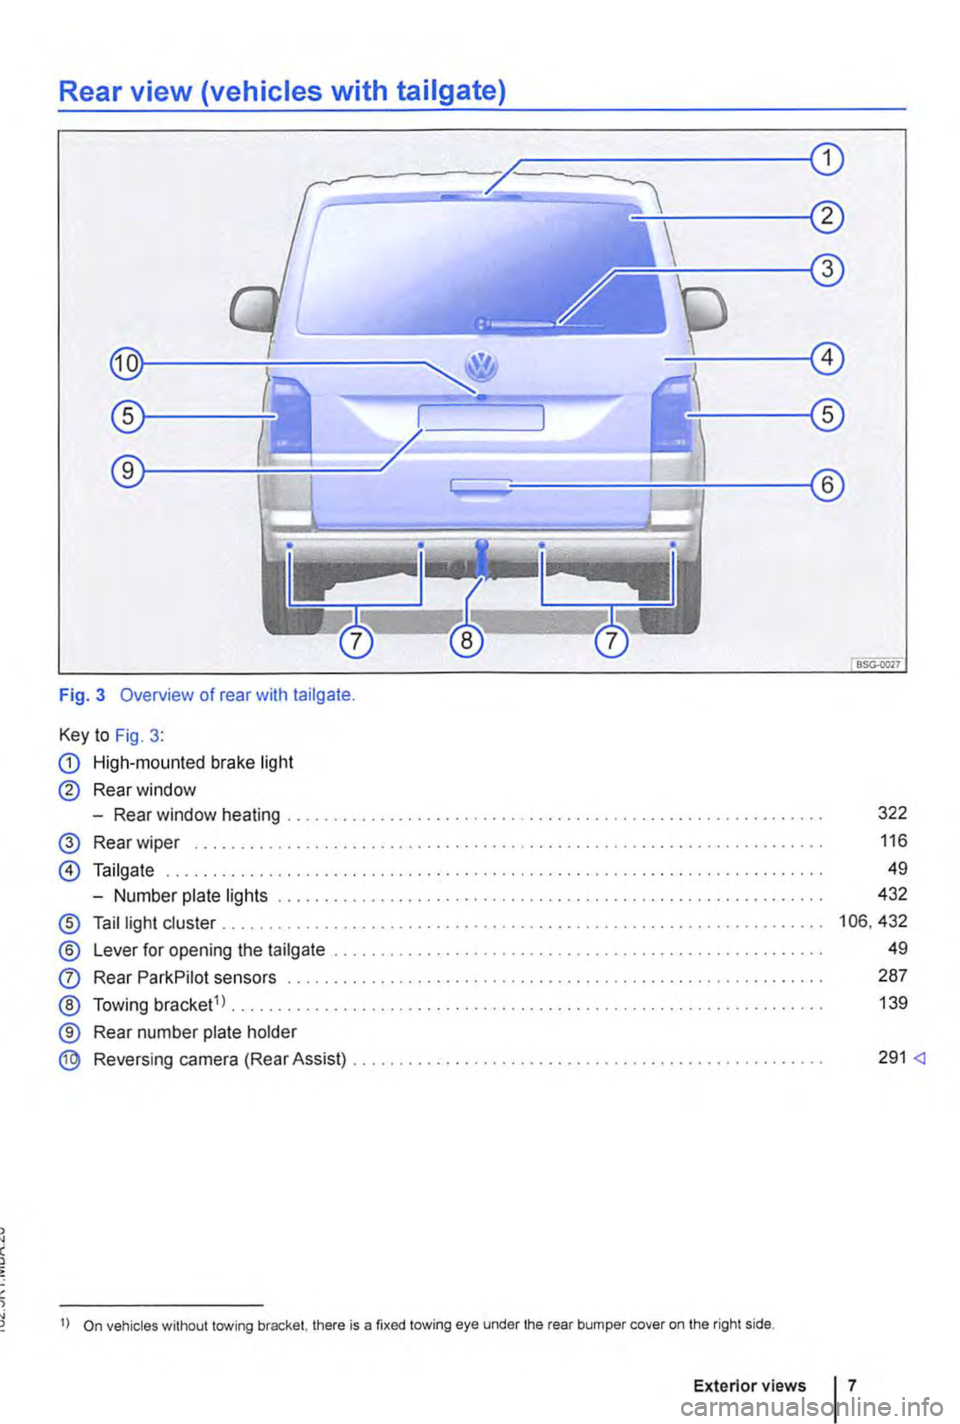 VOLKSWAGEN TRANSPORTER 2012  Owners Manual Rear view (vehicles with tailgate) 
Fig. 3 Overview of rear with tailgate. 
Key to Fig. 3: 
CD High-mounted brake light 
@ Rear window 
-Rear window heating ........................ . 
@ Rear wiper ..